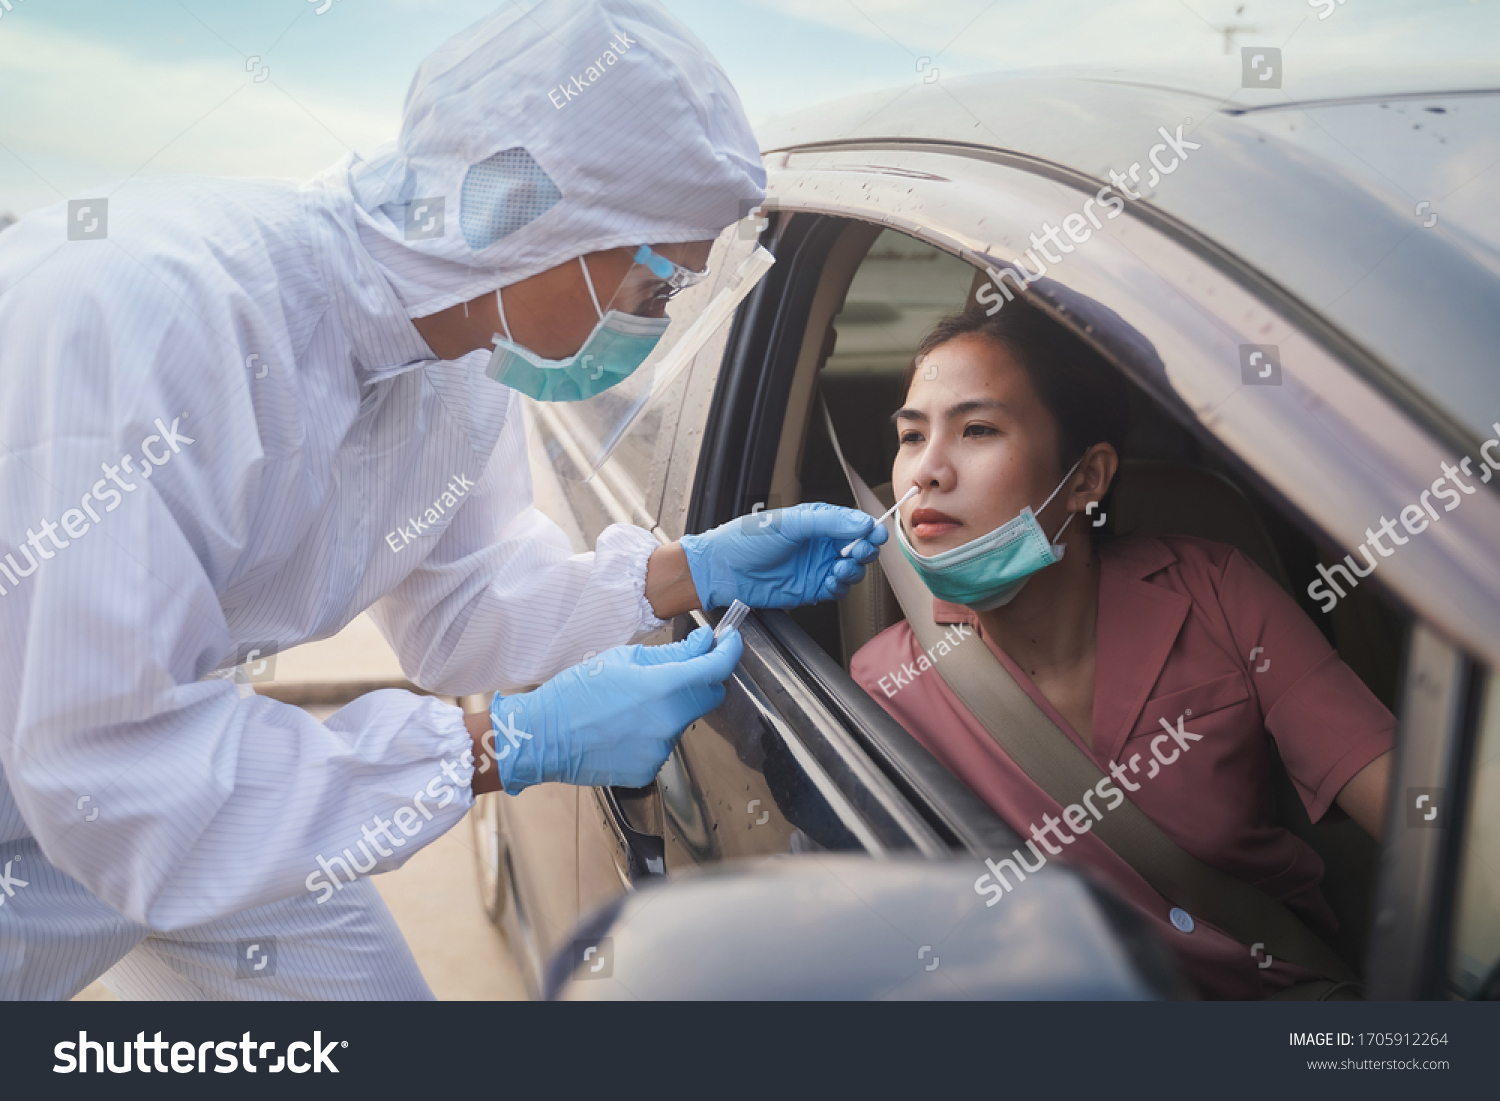 Medical worker in protective suit screening woman Driver to Sampling secretion to check for Covid-19. Drive thru test coronavirus fast track. Concept prevention coronavirus outbreak. #1705912264